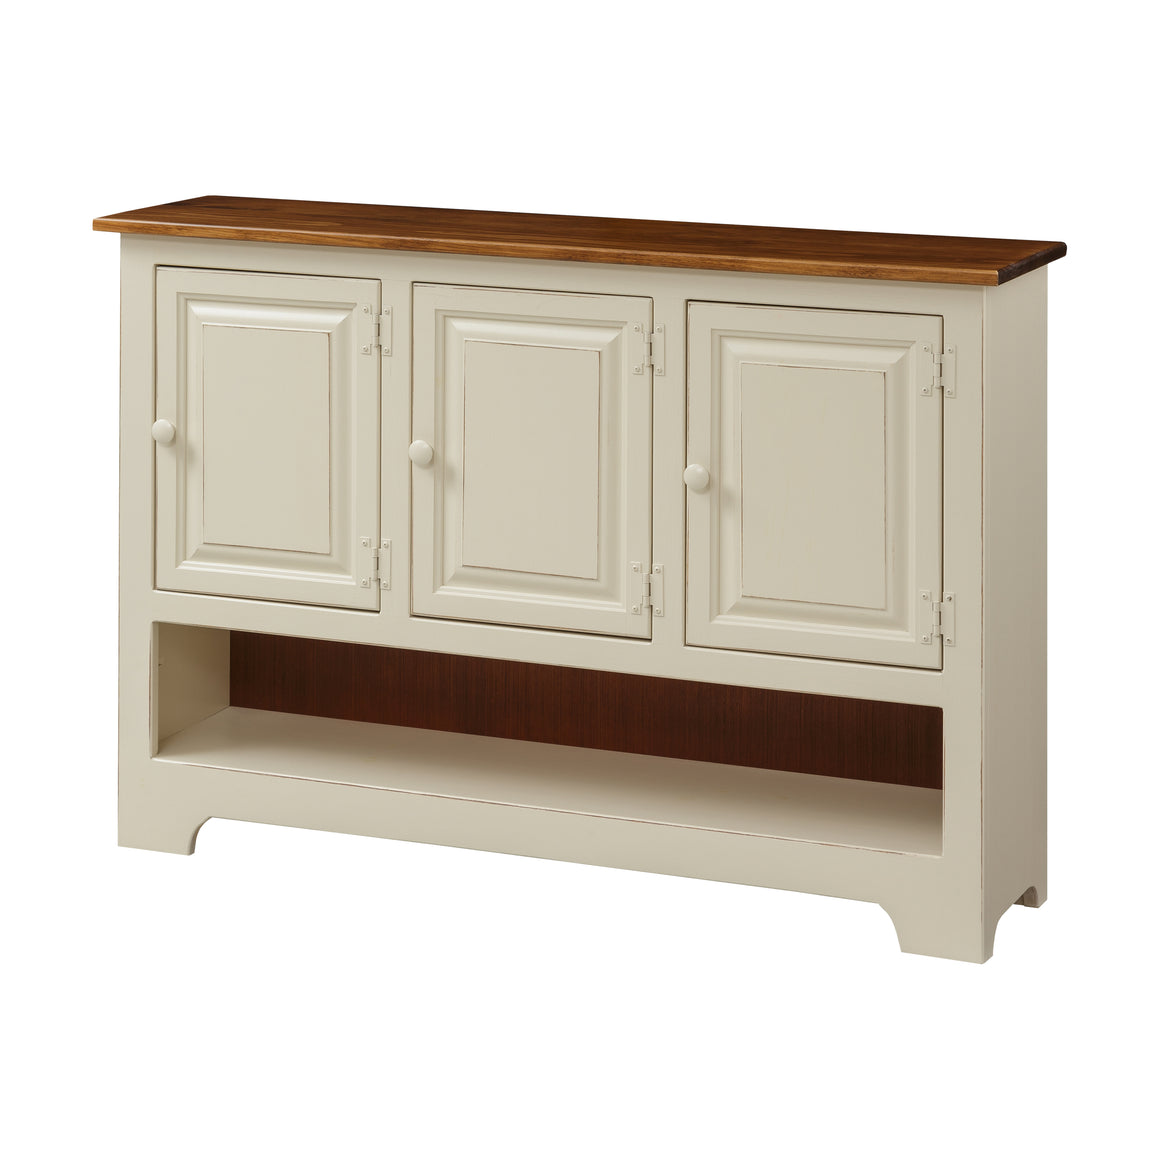 Triple Hall Cabinet with Wood (IE #117WO)